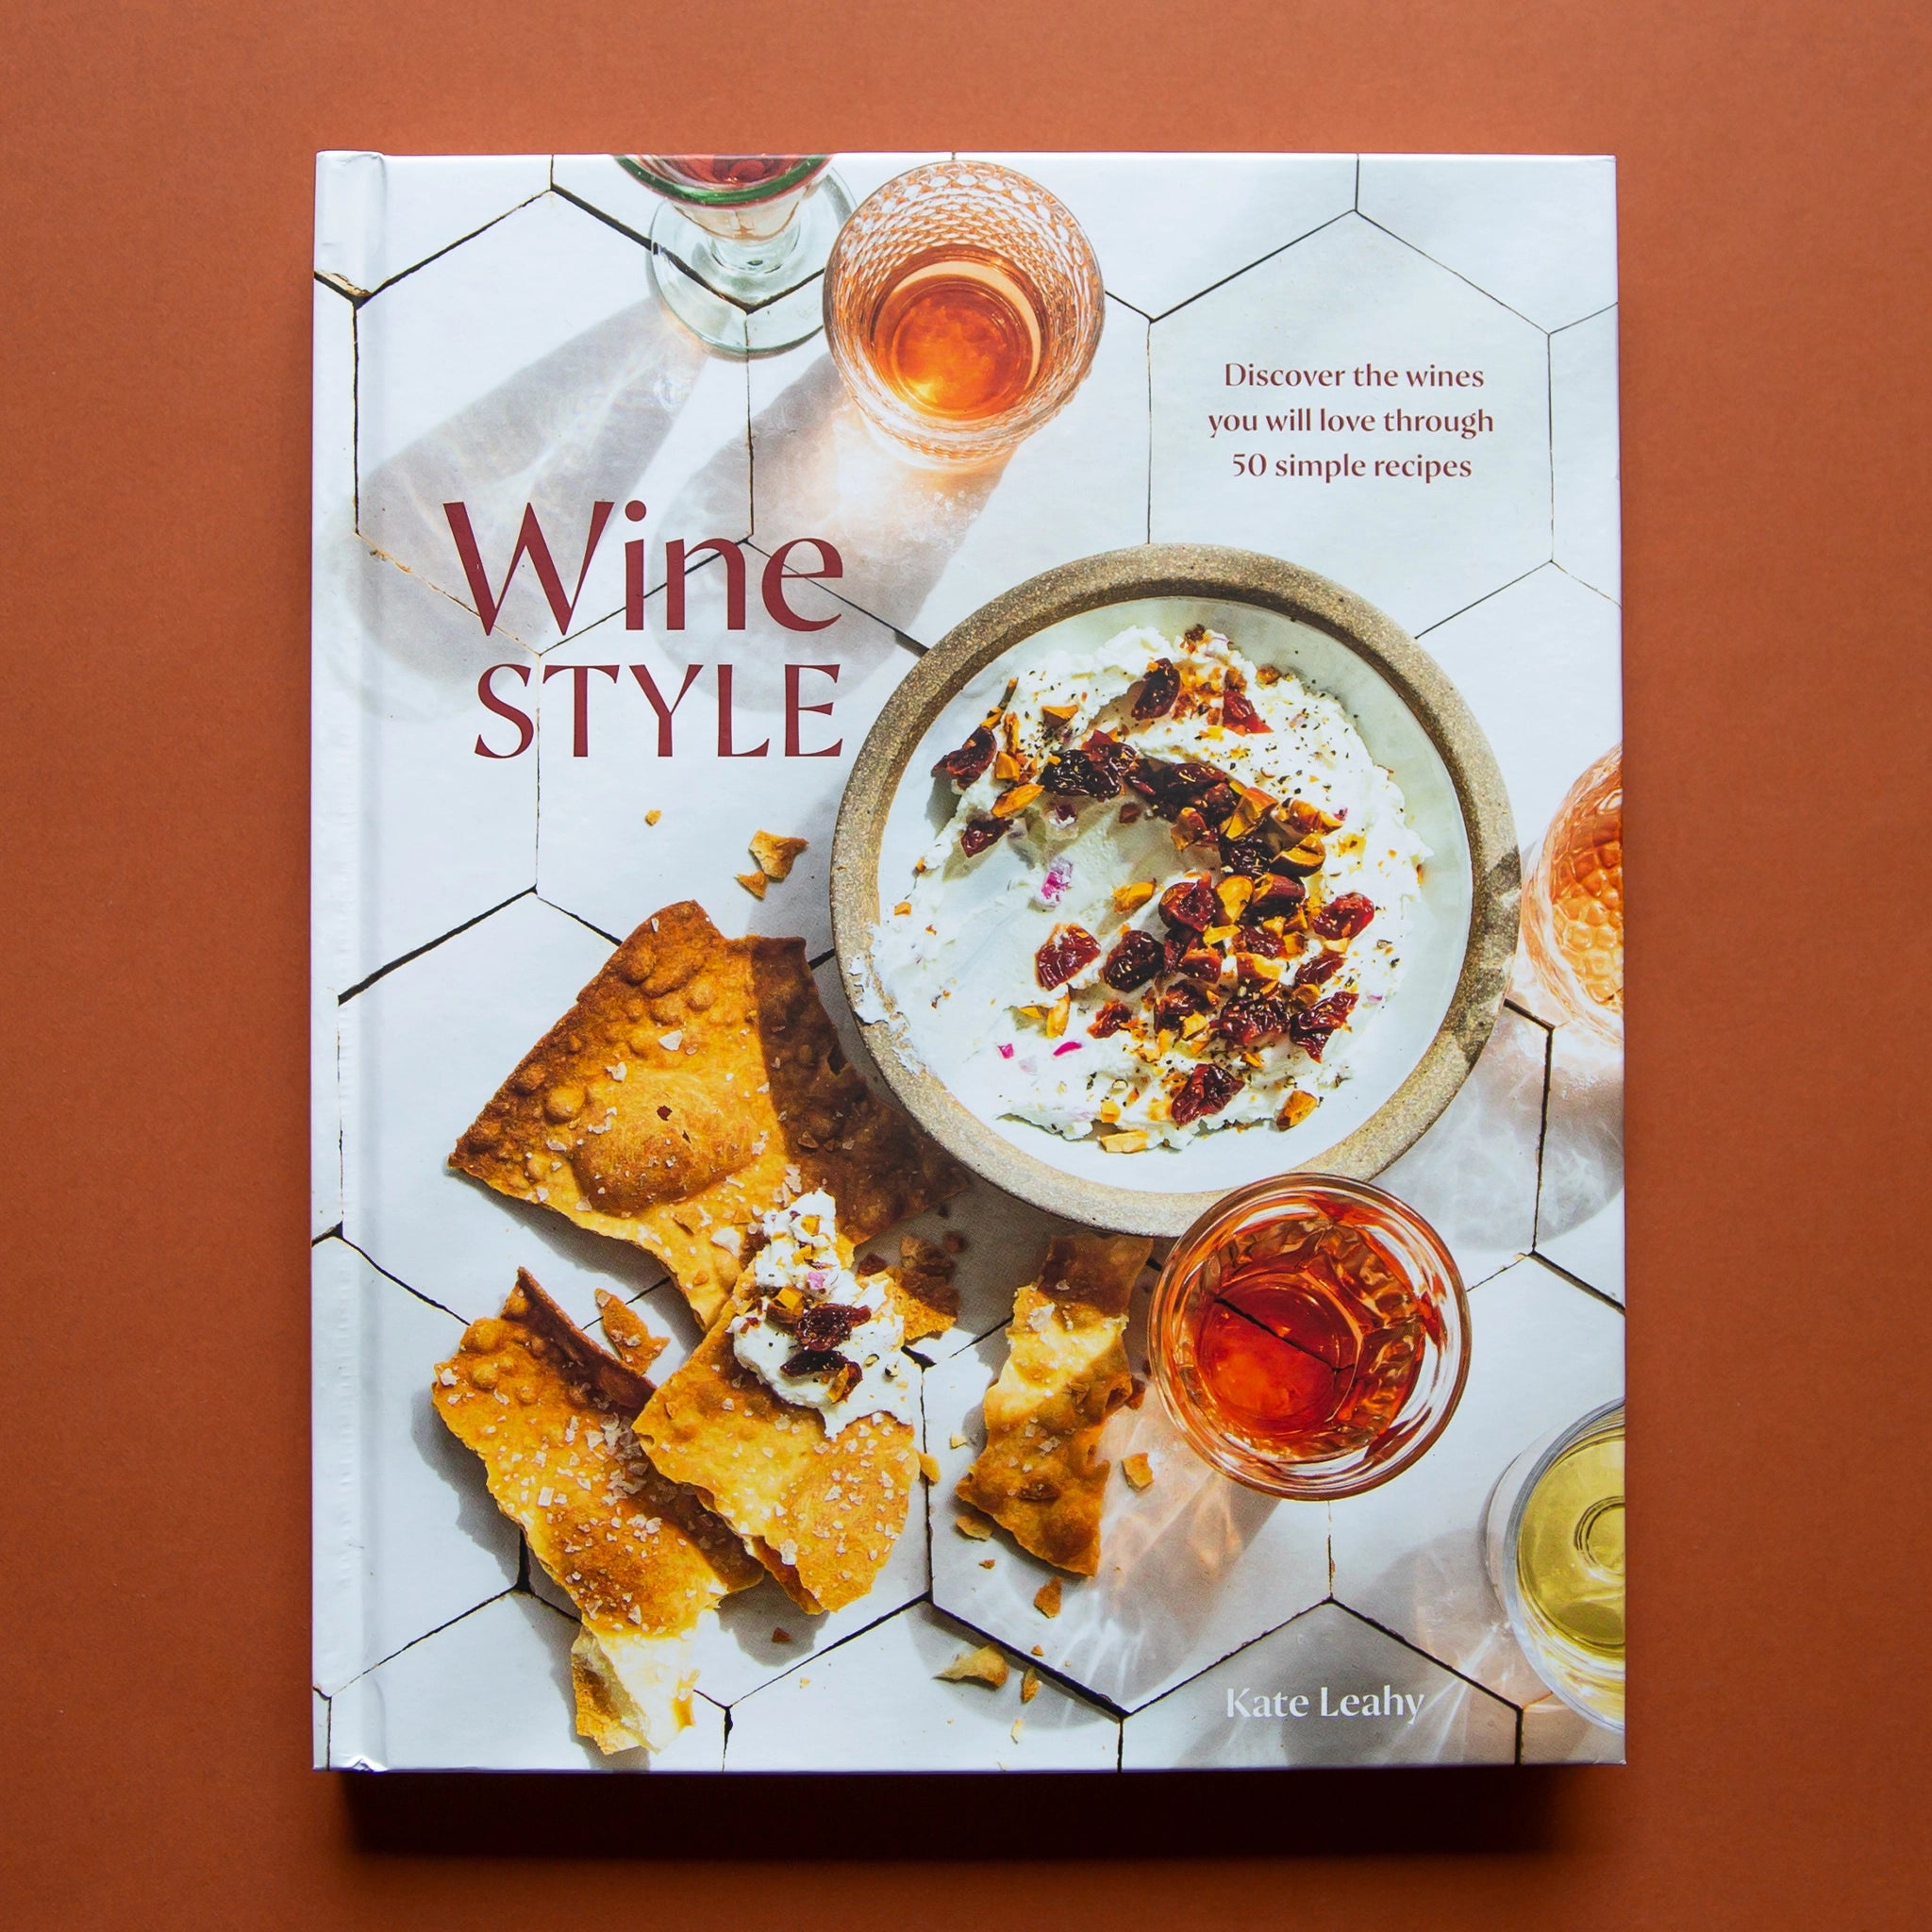 Hard covered cookbook titled 'Wine Style: Discover the wines you will love through 50 simple recipes' in red lettering. Book cover features brittle salted crackers and dip along side wine-filled cocktail glasses against white modern tiled.